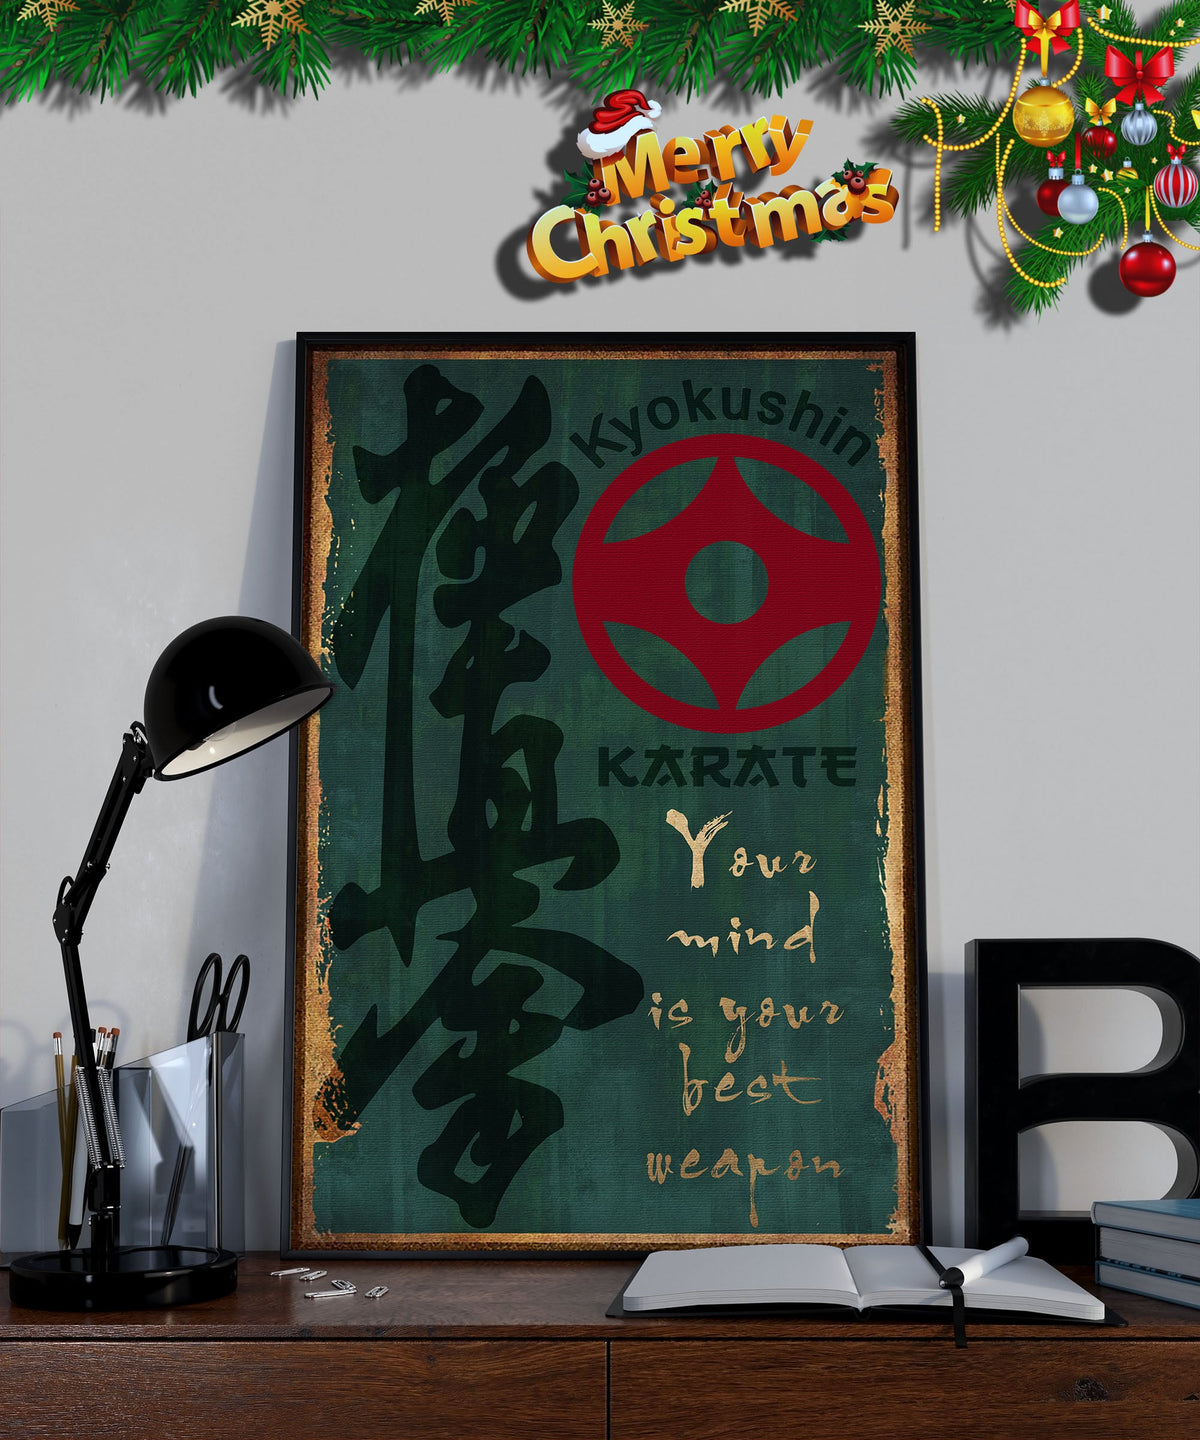 KA042 - Your Mind Is Your Best Weapon -  Kyokushin Karate - Vertical Poster - Vertical Canvas - Karate Poster - Karate Canvas